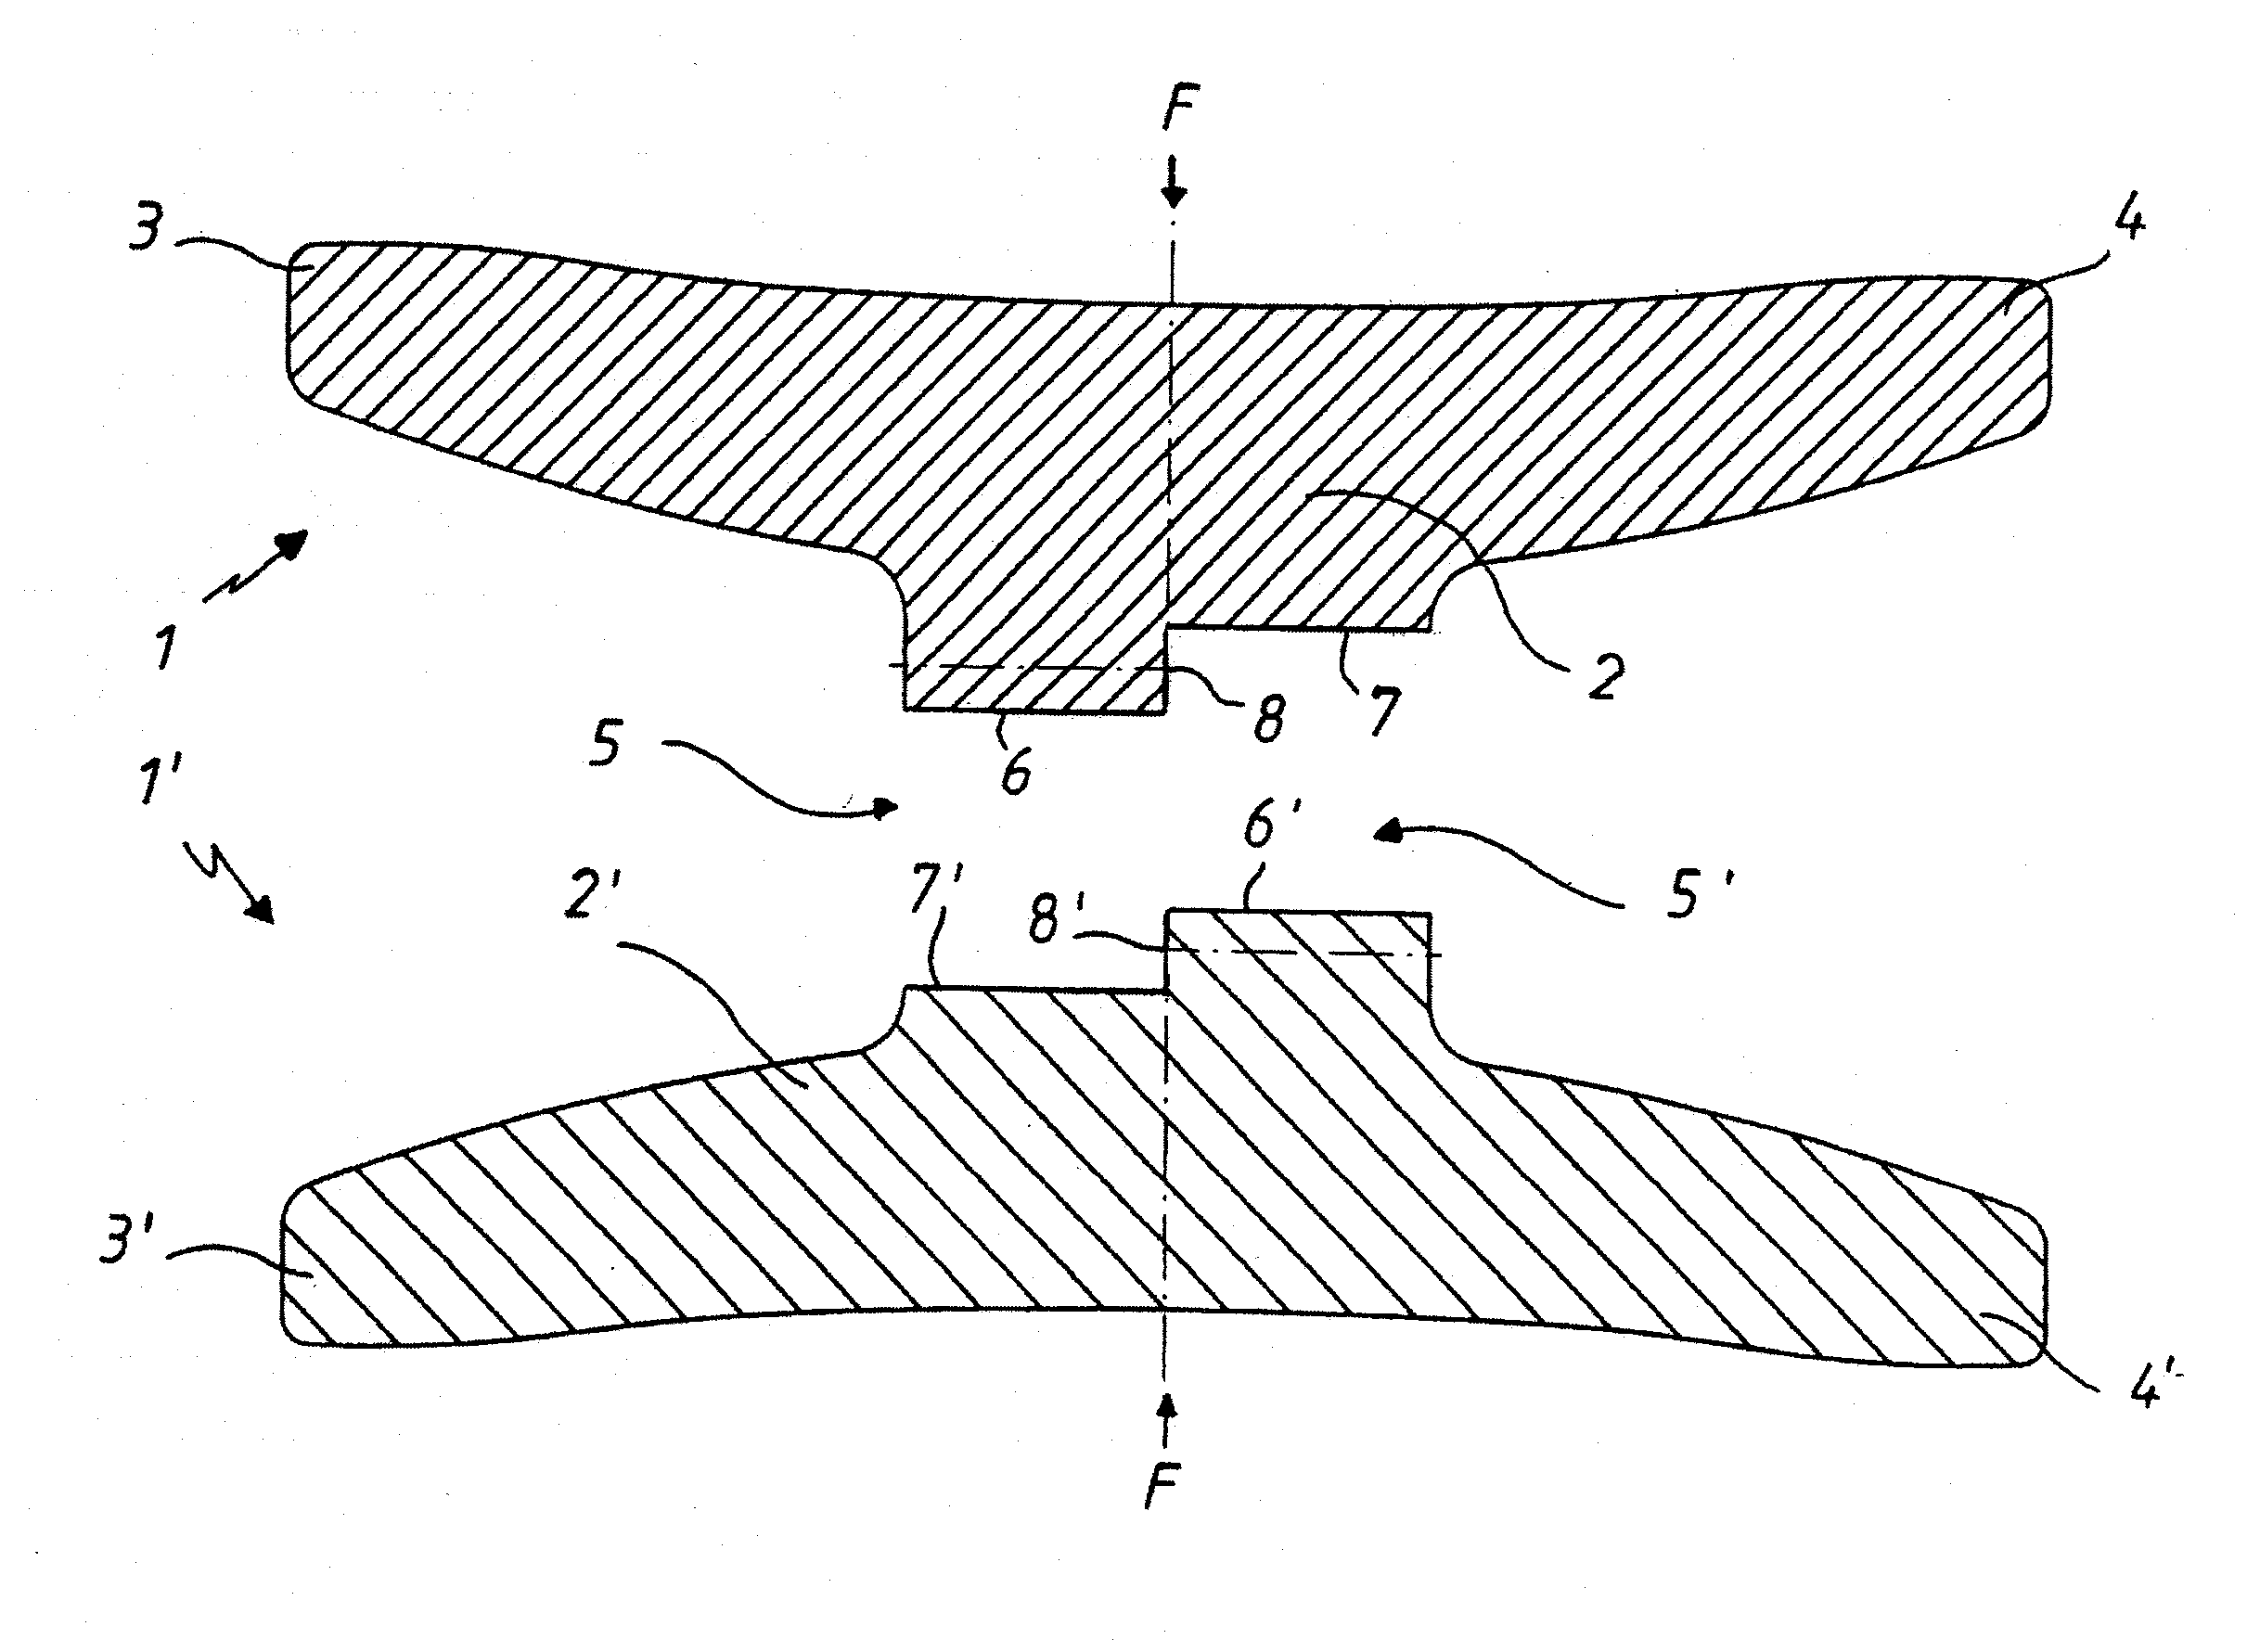 Sealing element for sealing flange surfaces on internal combustion engines